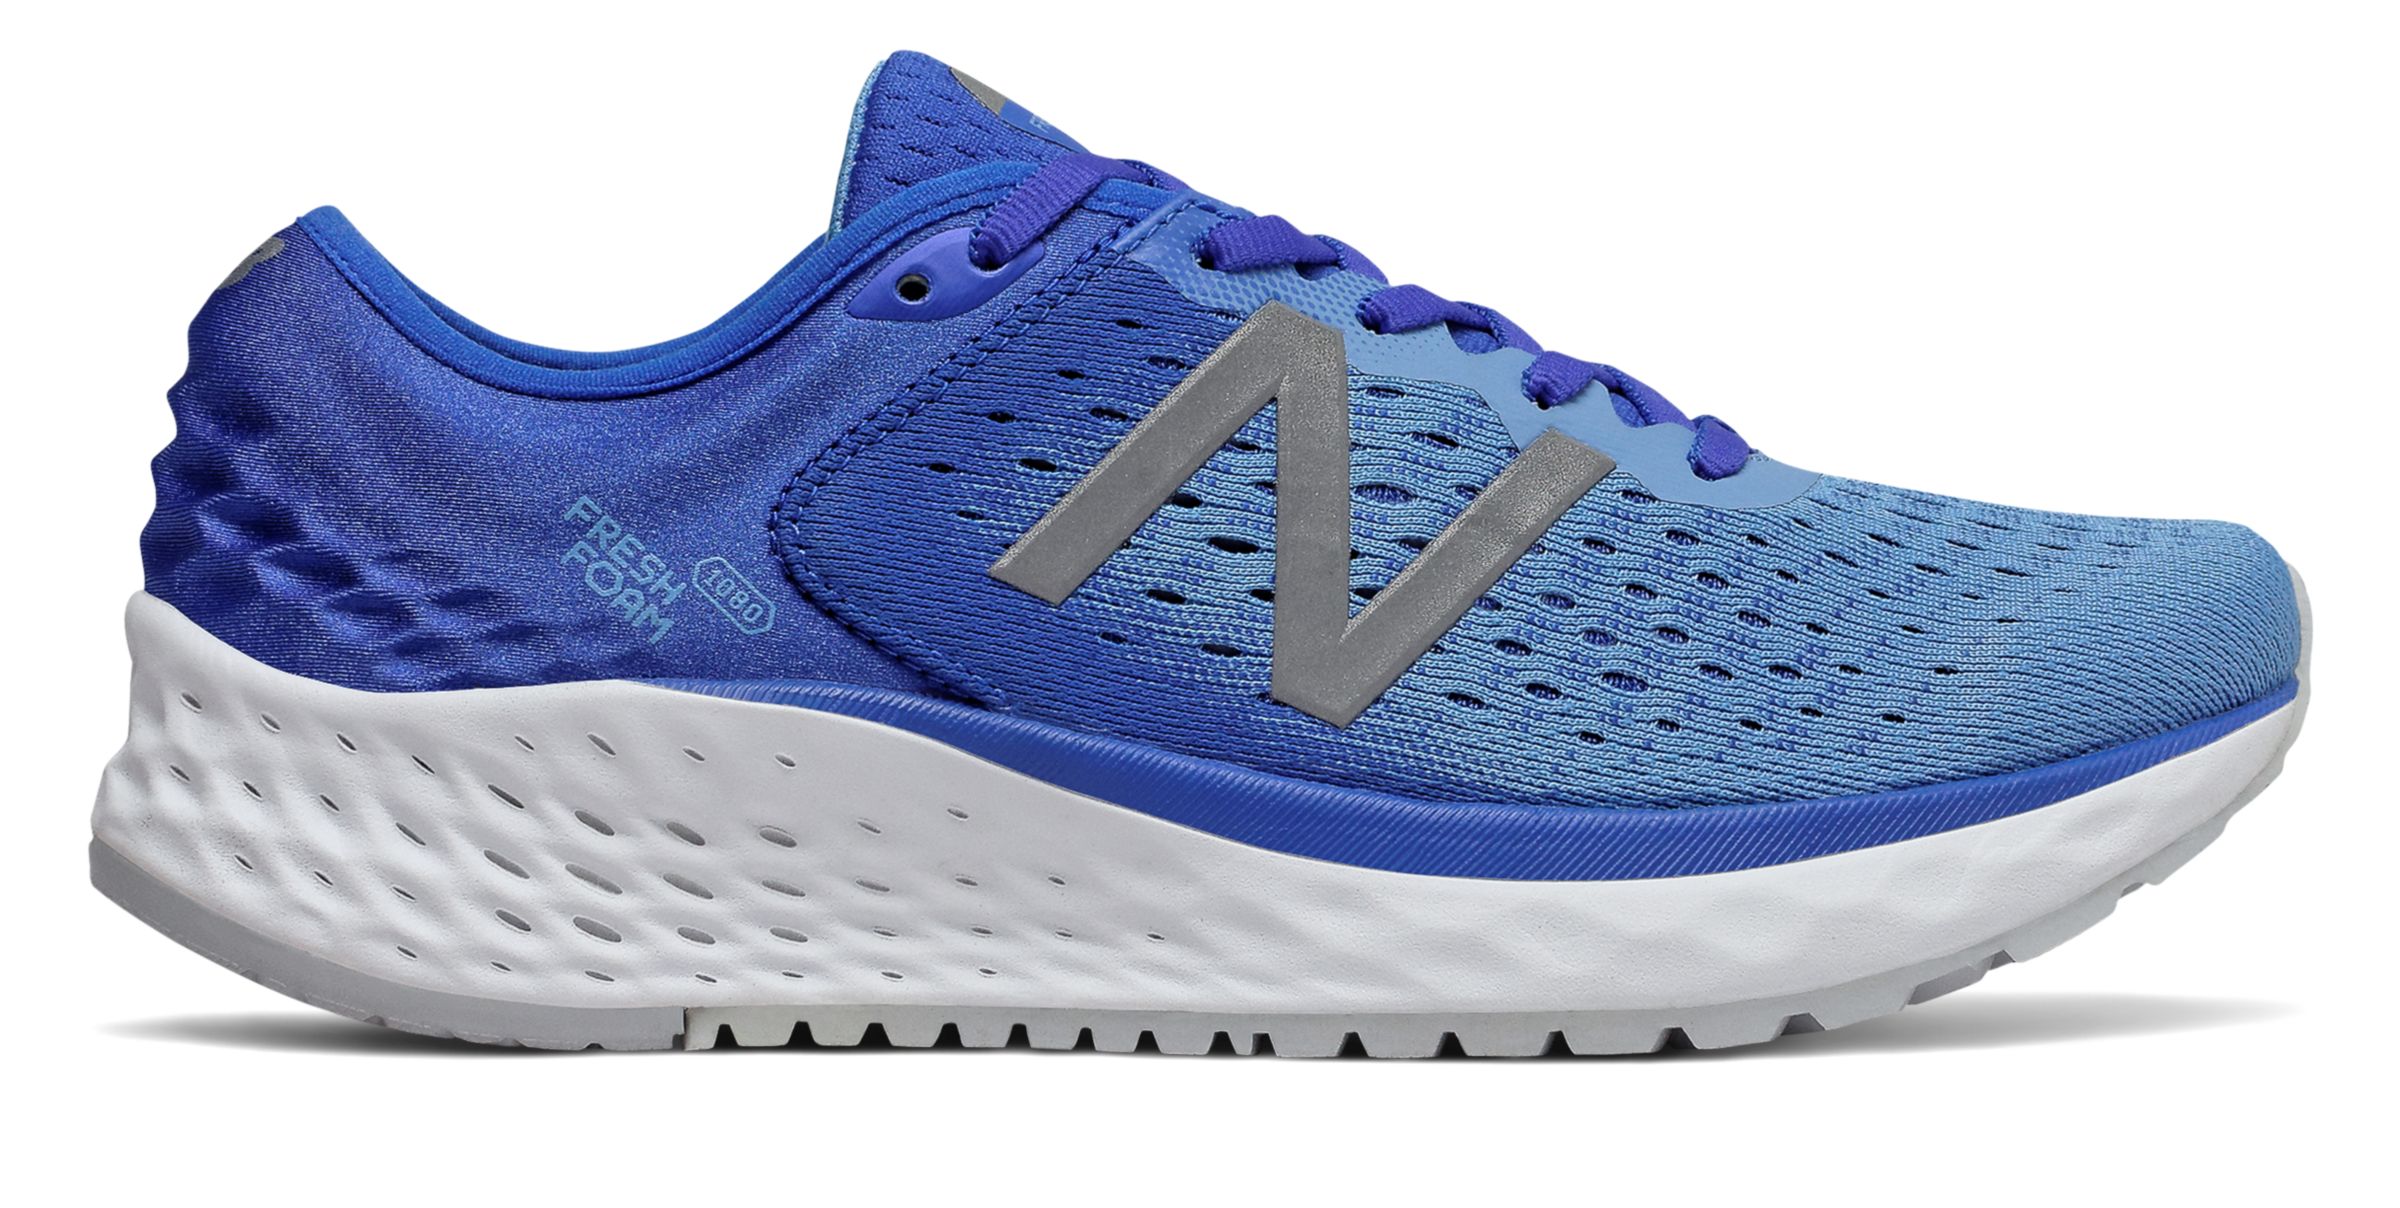 New Balance W1080V9-26274-W on Sale - Discounts Up to 57% Off on W1080VL9  at Joe's New Balance Outlet